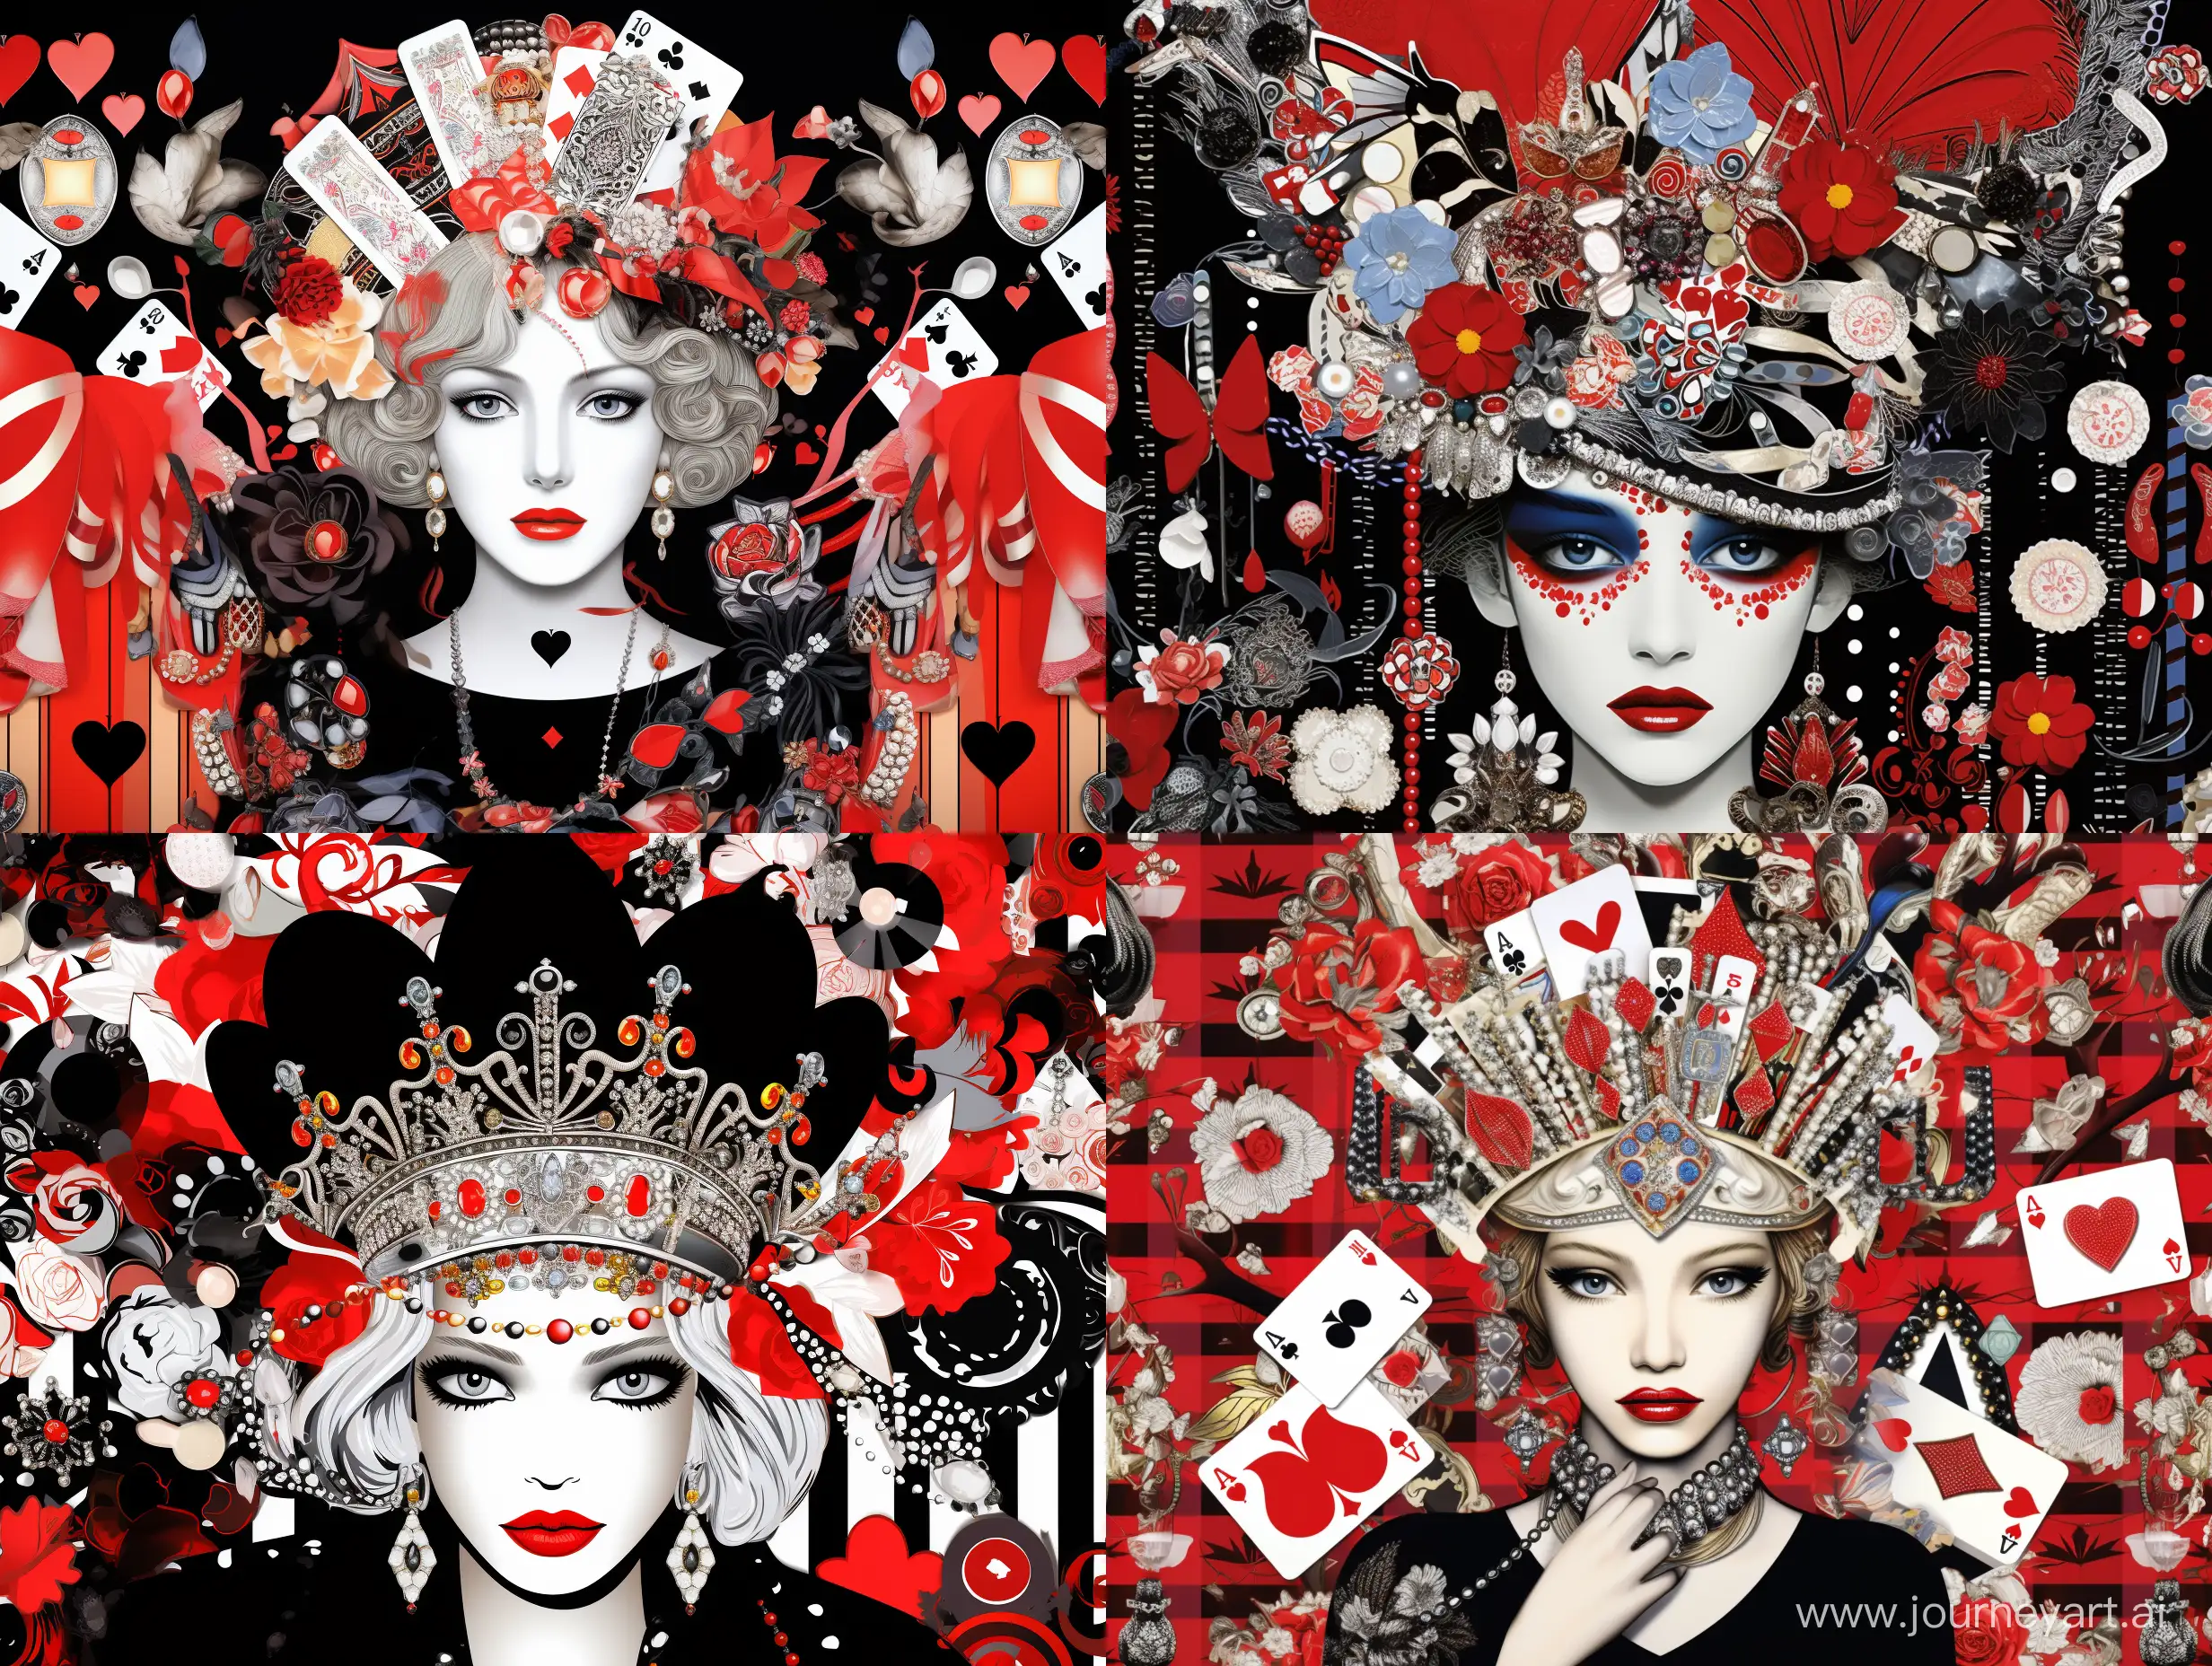 Portrait of Nina Ricci, with decorations from Ricci, a crown on her head, many details, complex, on the background of a pattern of fashionable accessories, colors black, white, red, gray, caricature, cartoon style, pop art style, fashion illustration style